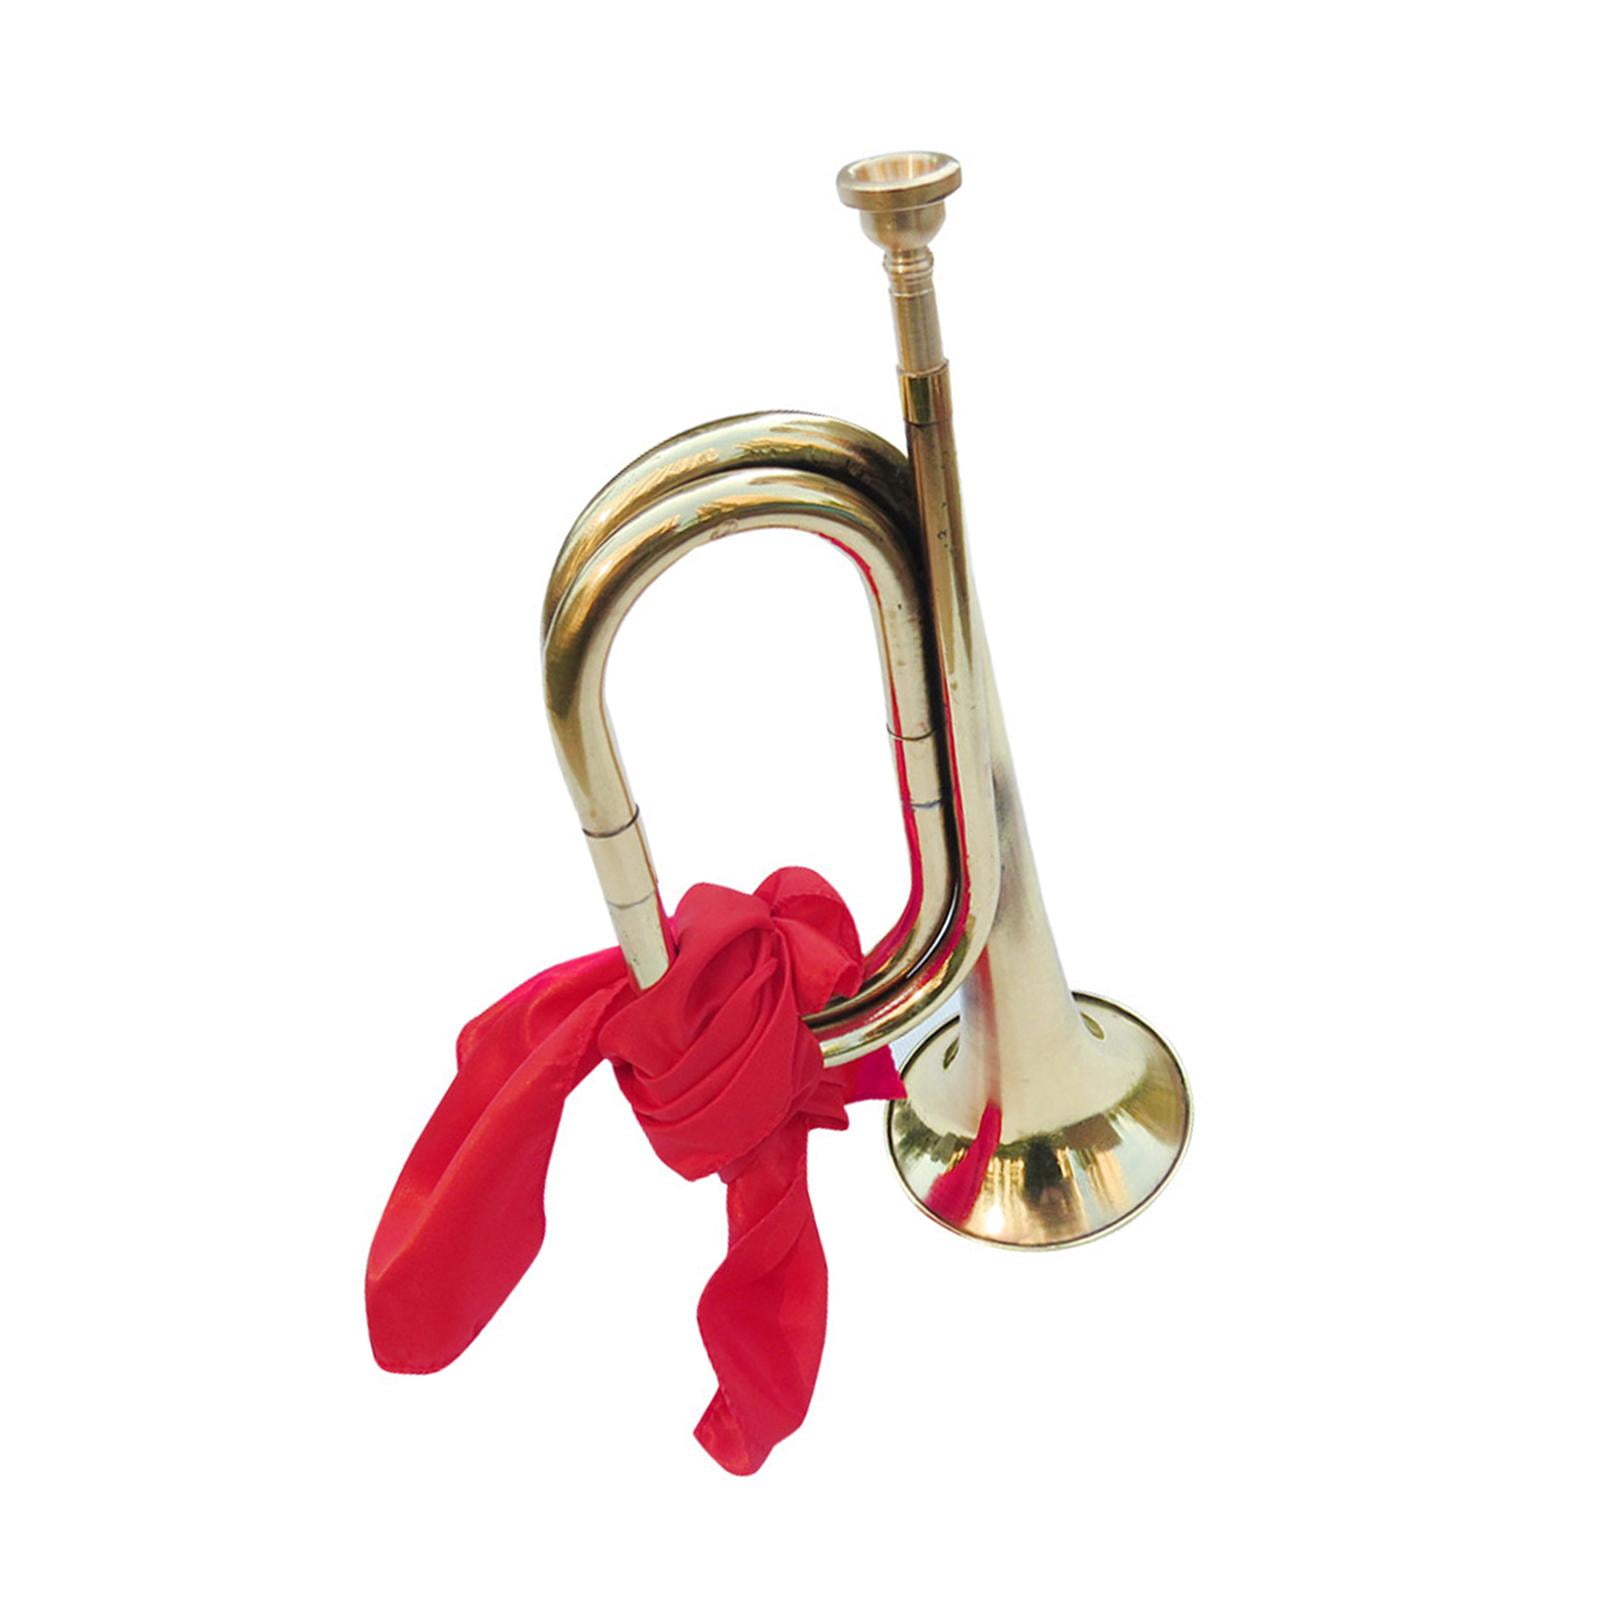 Scout Bugle Brass Bugle Music Instrument Classic Style with Mouthpiece  Cavalry Trumpet Marching Bugle for Orchestra Band Adults Kids Aureate